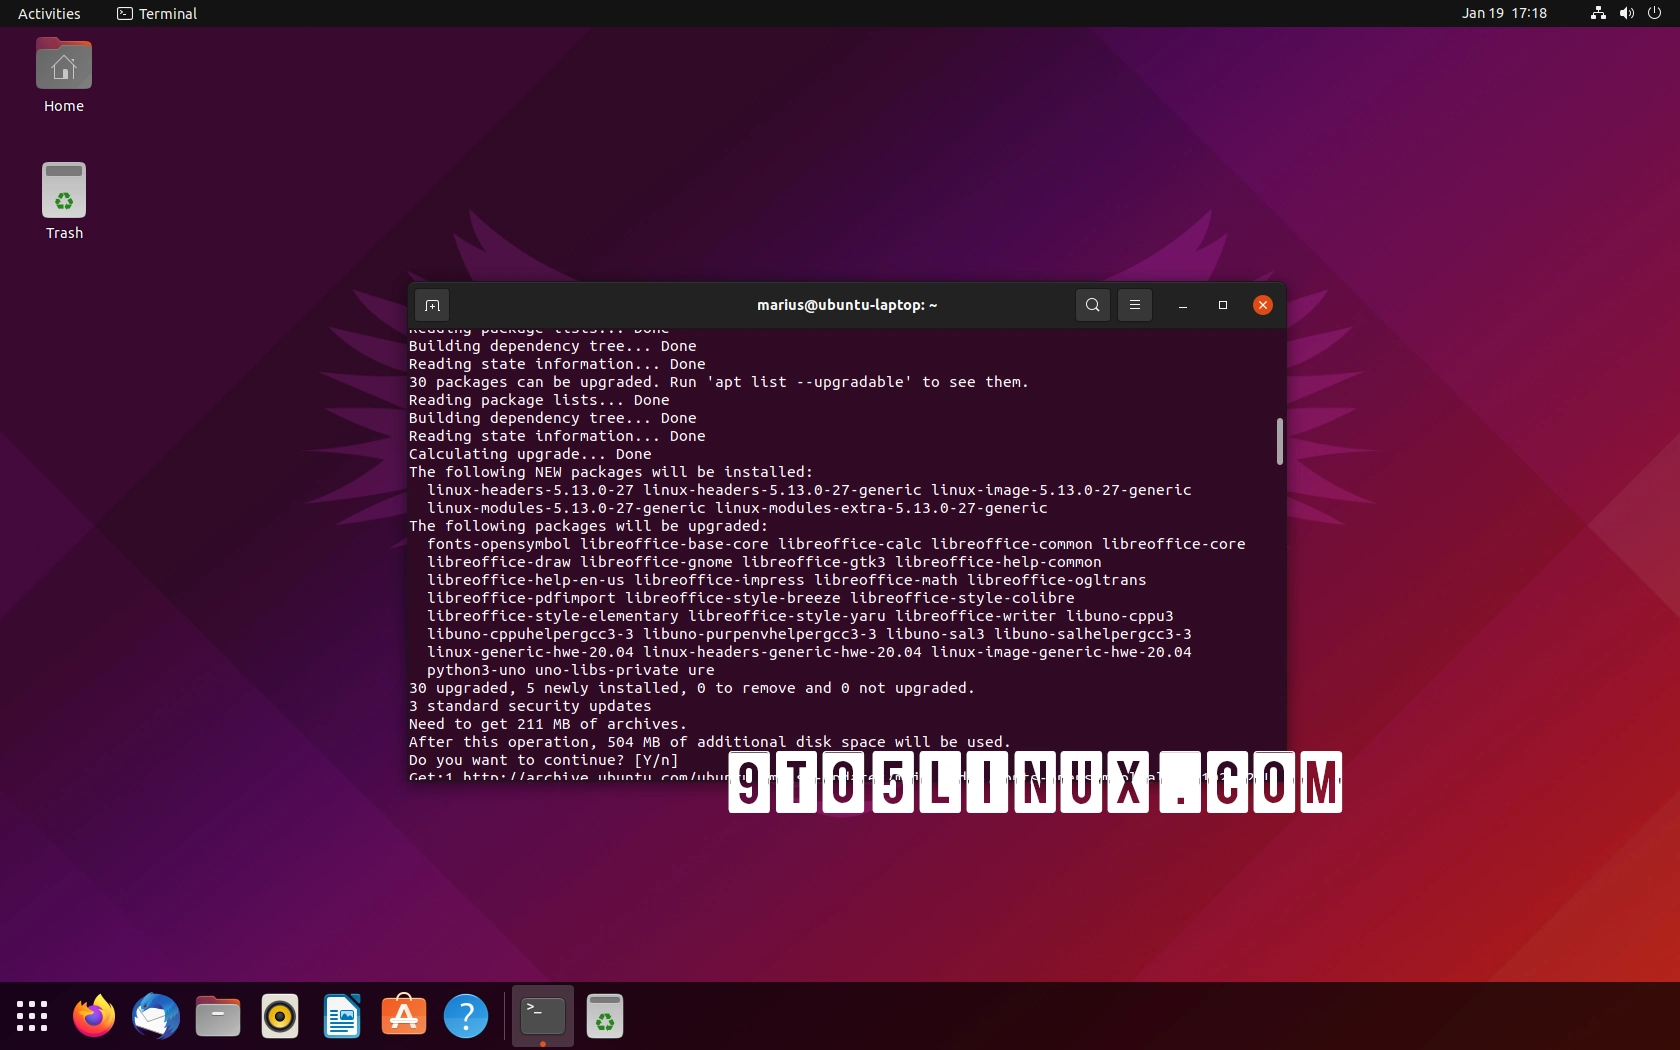 New Linux Kernel Vulnerability Patched in All Supported Ubuntu Systems, Update Now